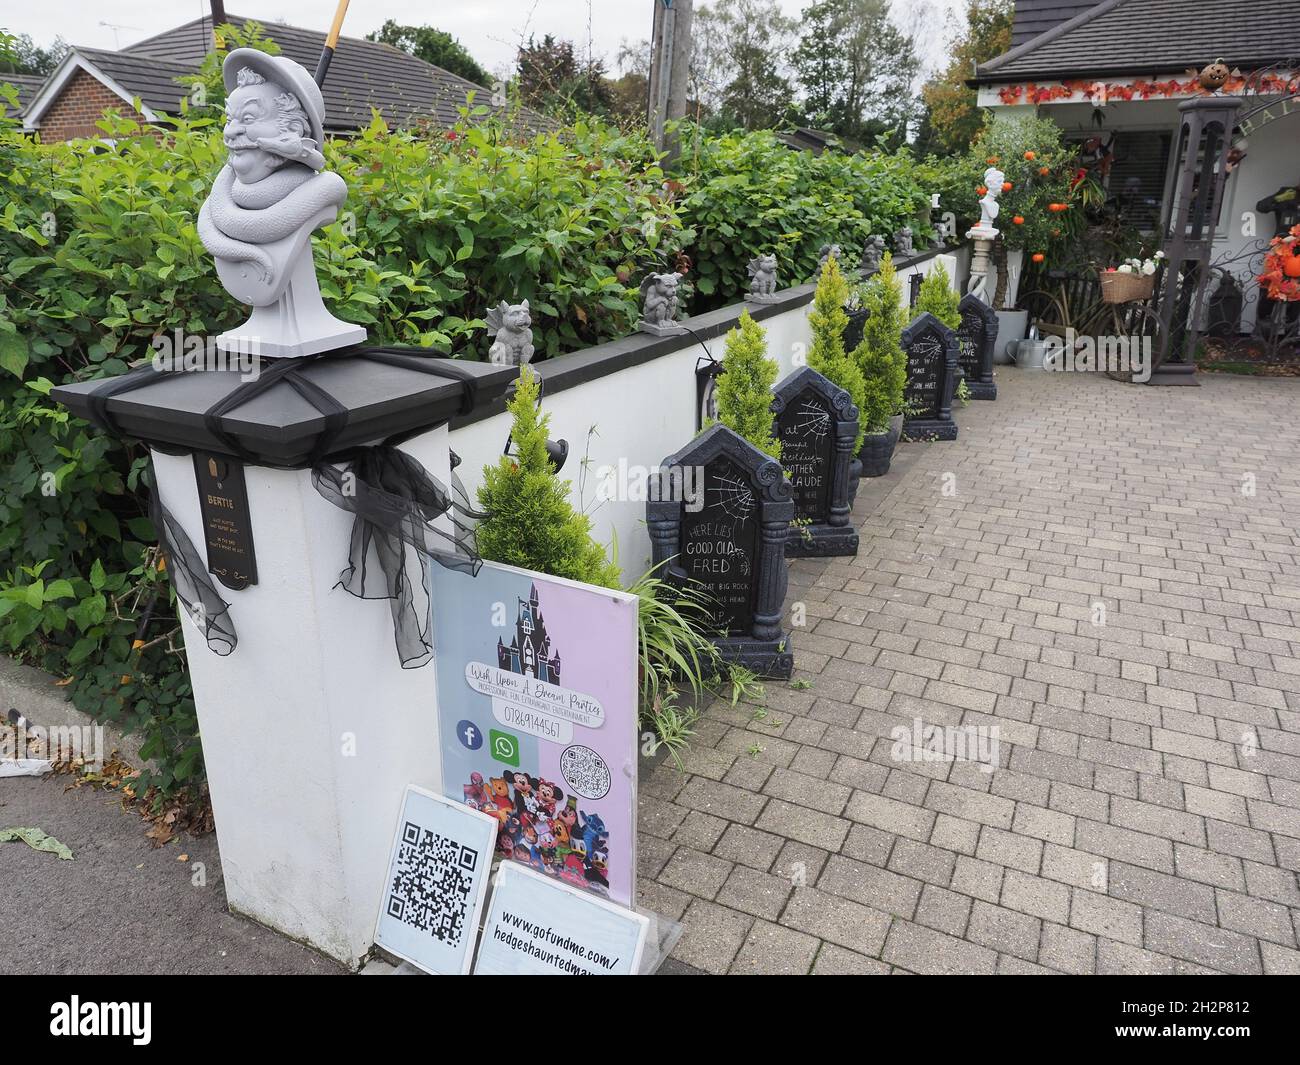 Rainham, Kent, UK. 23rd Oct, 2021. The Hedges family in Rainham, Kent have transformed their house into a Haunted Mansion featuring Disney characters for Halloween to raise money for charities: Medway Foodbank & My Shining Star Children's Cancer Charity. Credit: James Bell/Alamy Live News Stock Photo